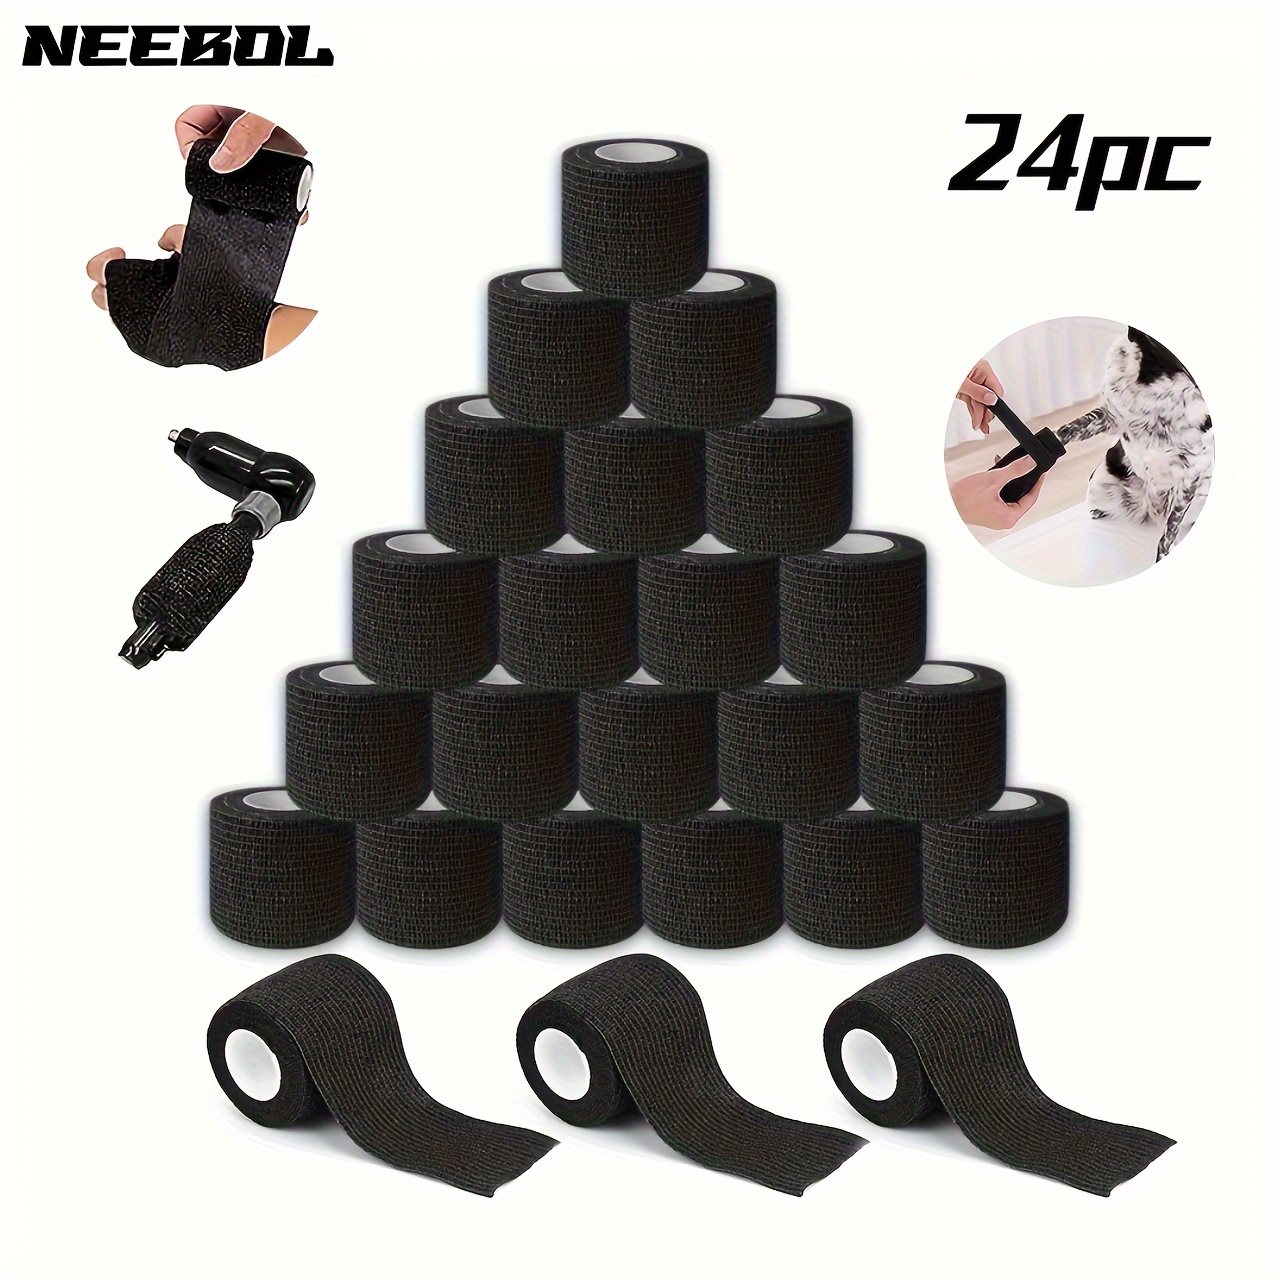 Supvox 10 Pcs Cable Protectors, Cable Organizer, Cord Organizer for  Appliances, Cord Wrap Cord Holder for